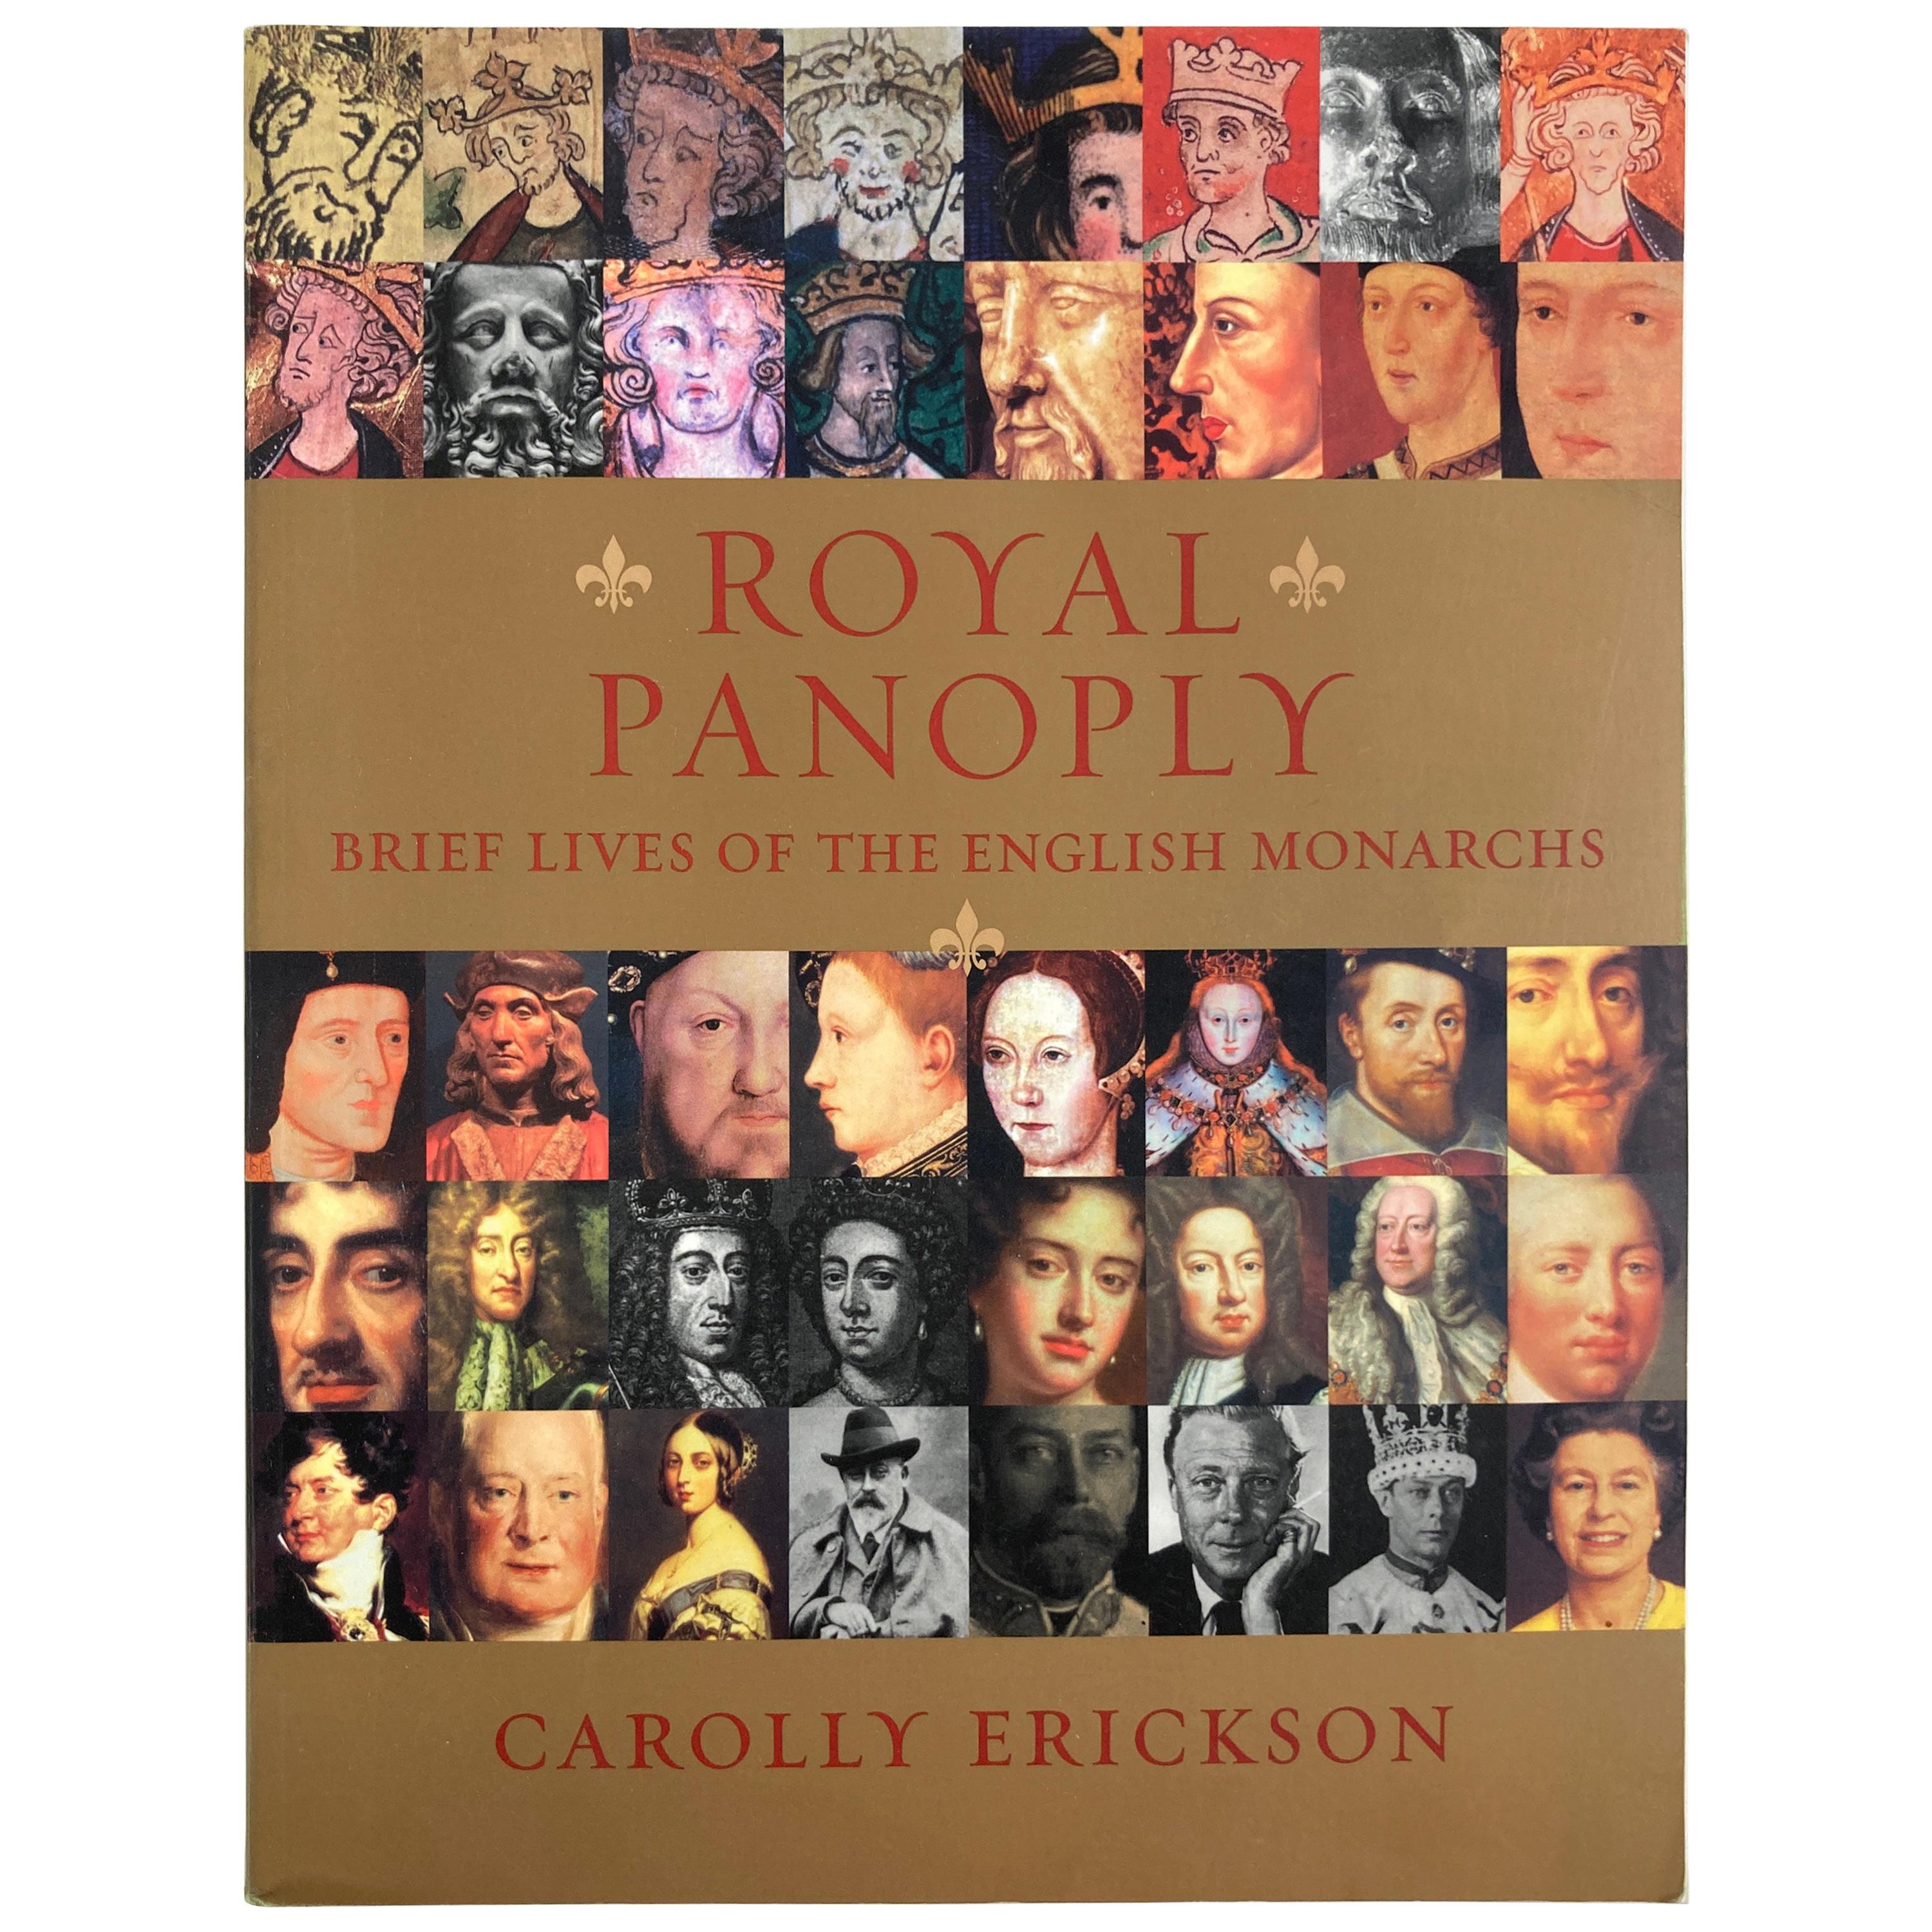 Royal Panoply Brief Lives of the English Monarchs by Carolly Erickson Book